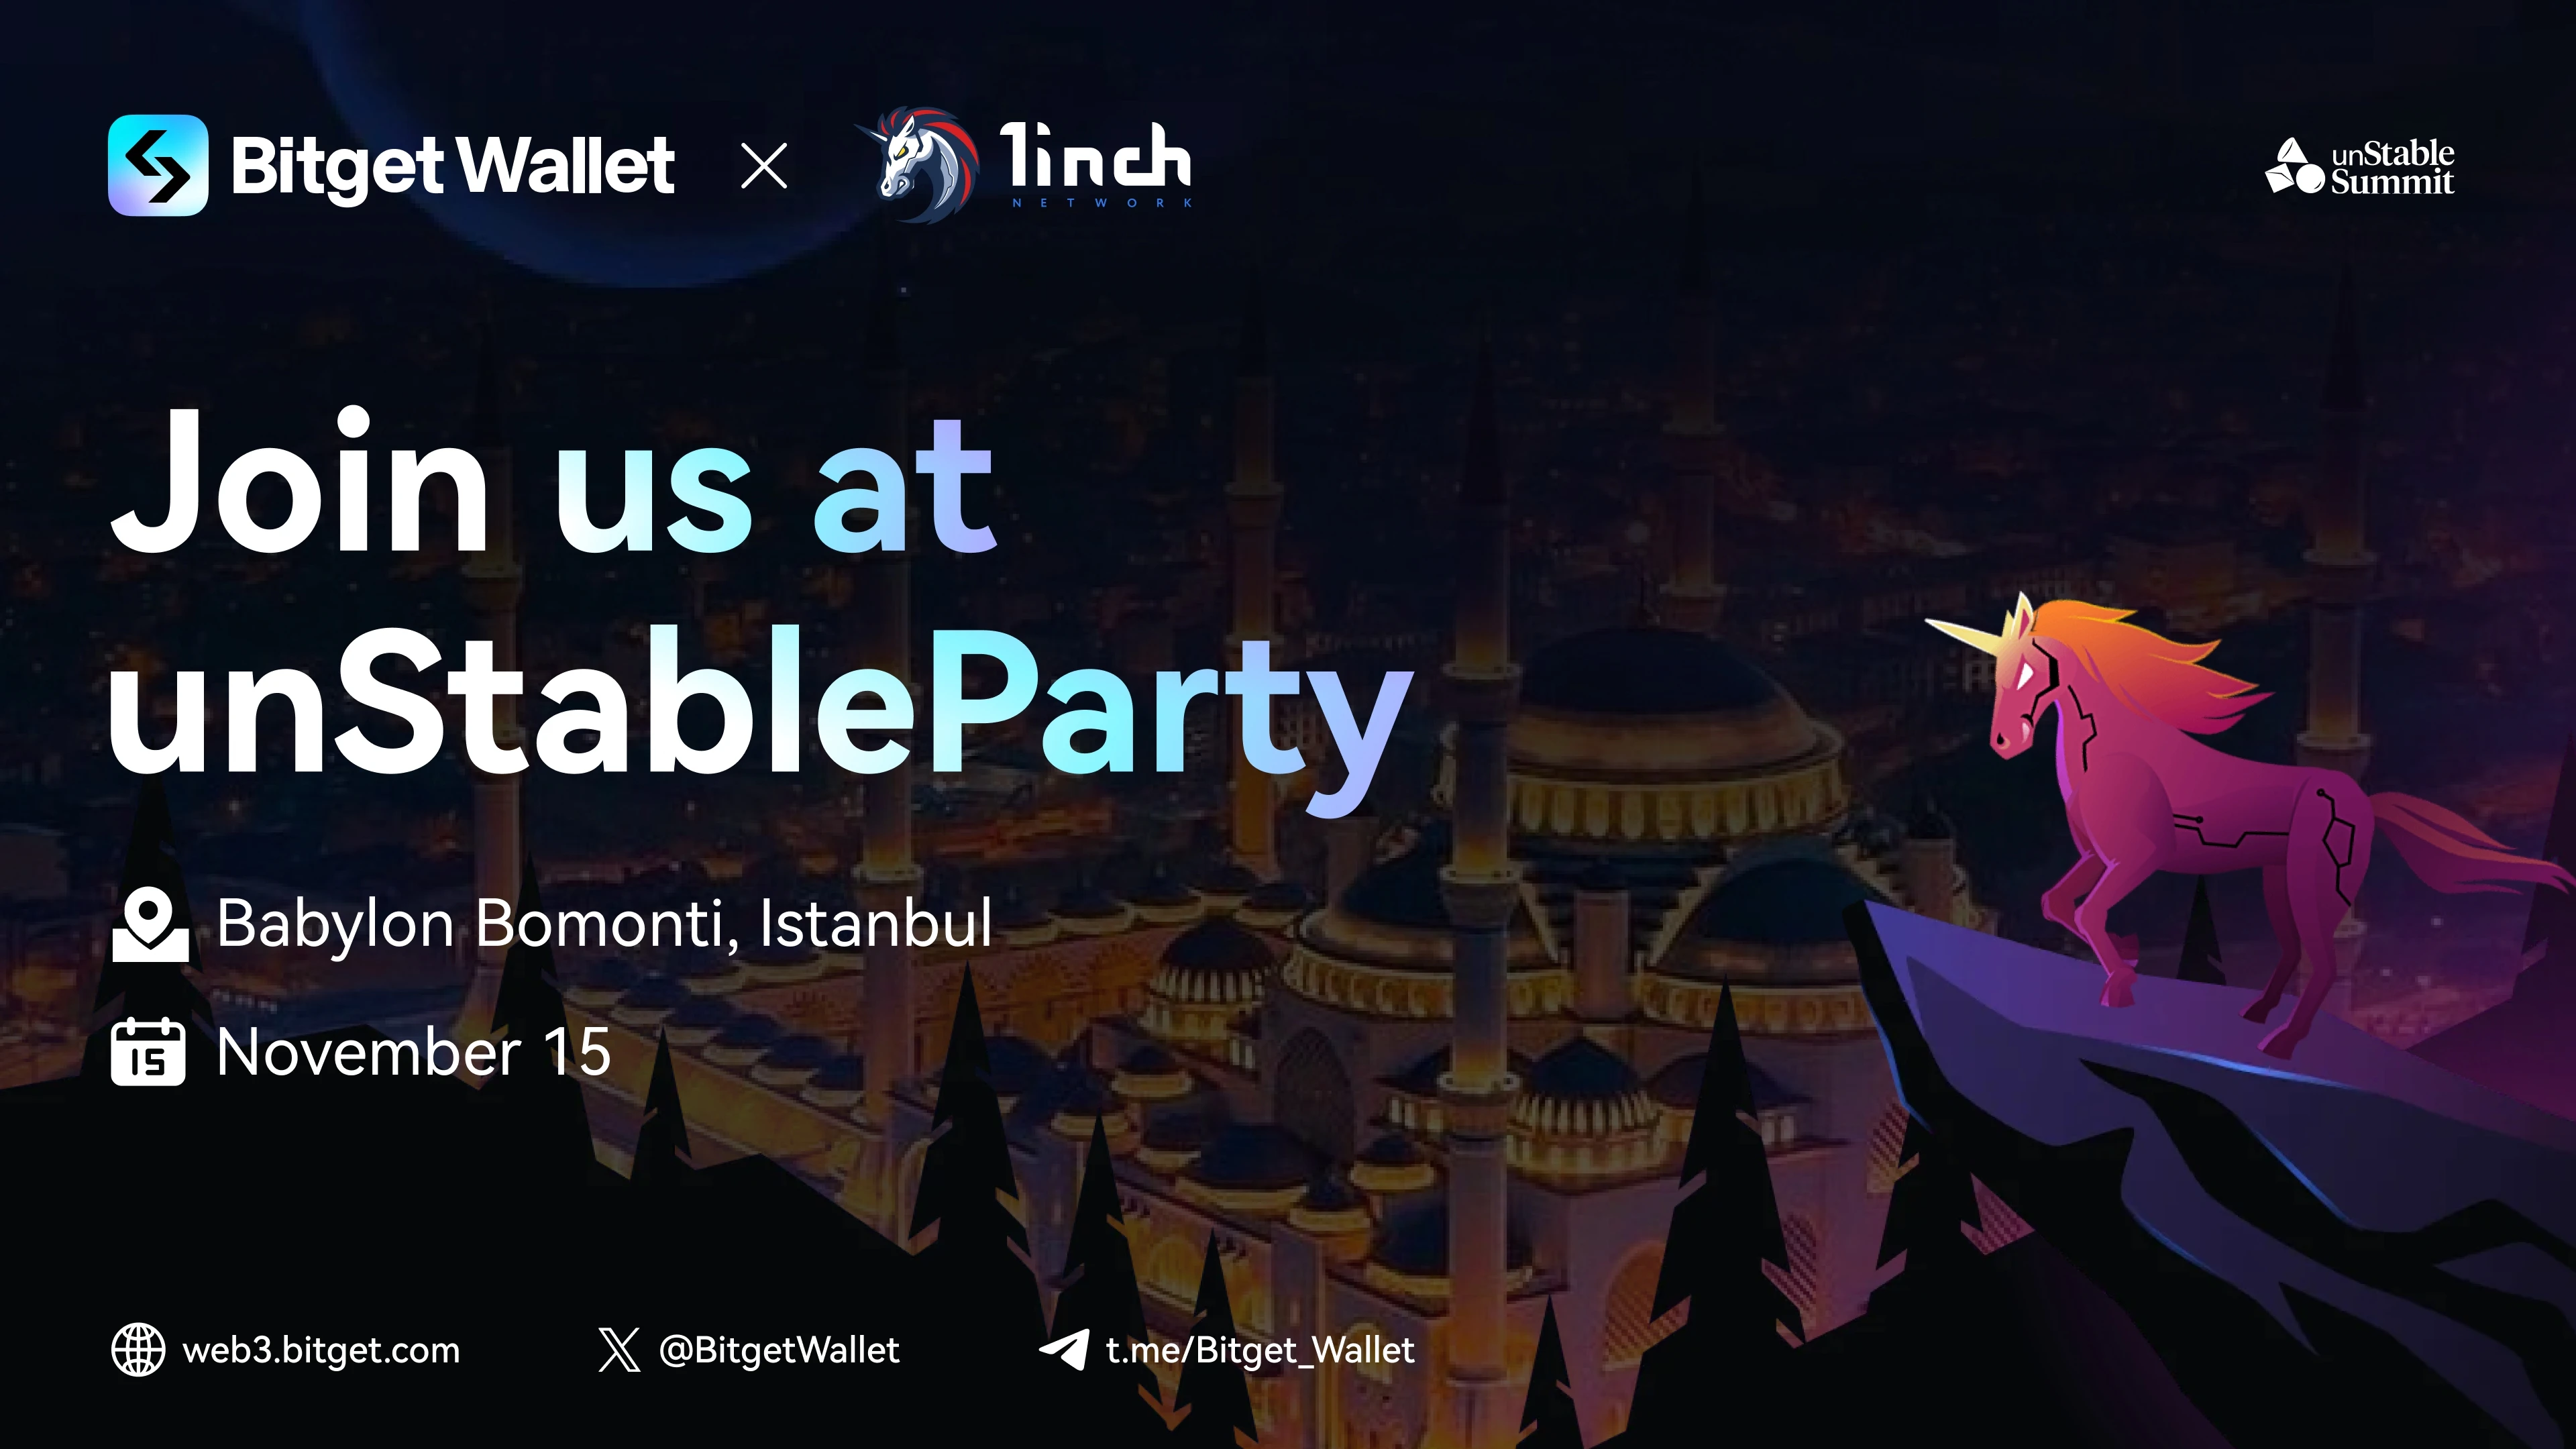 Bitget Wallet attended Devconnect Istanbul and co-hosted offline events with 1inch